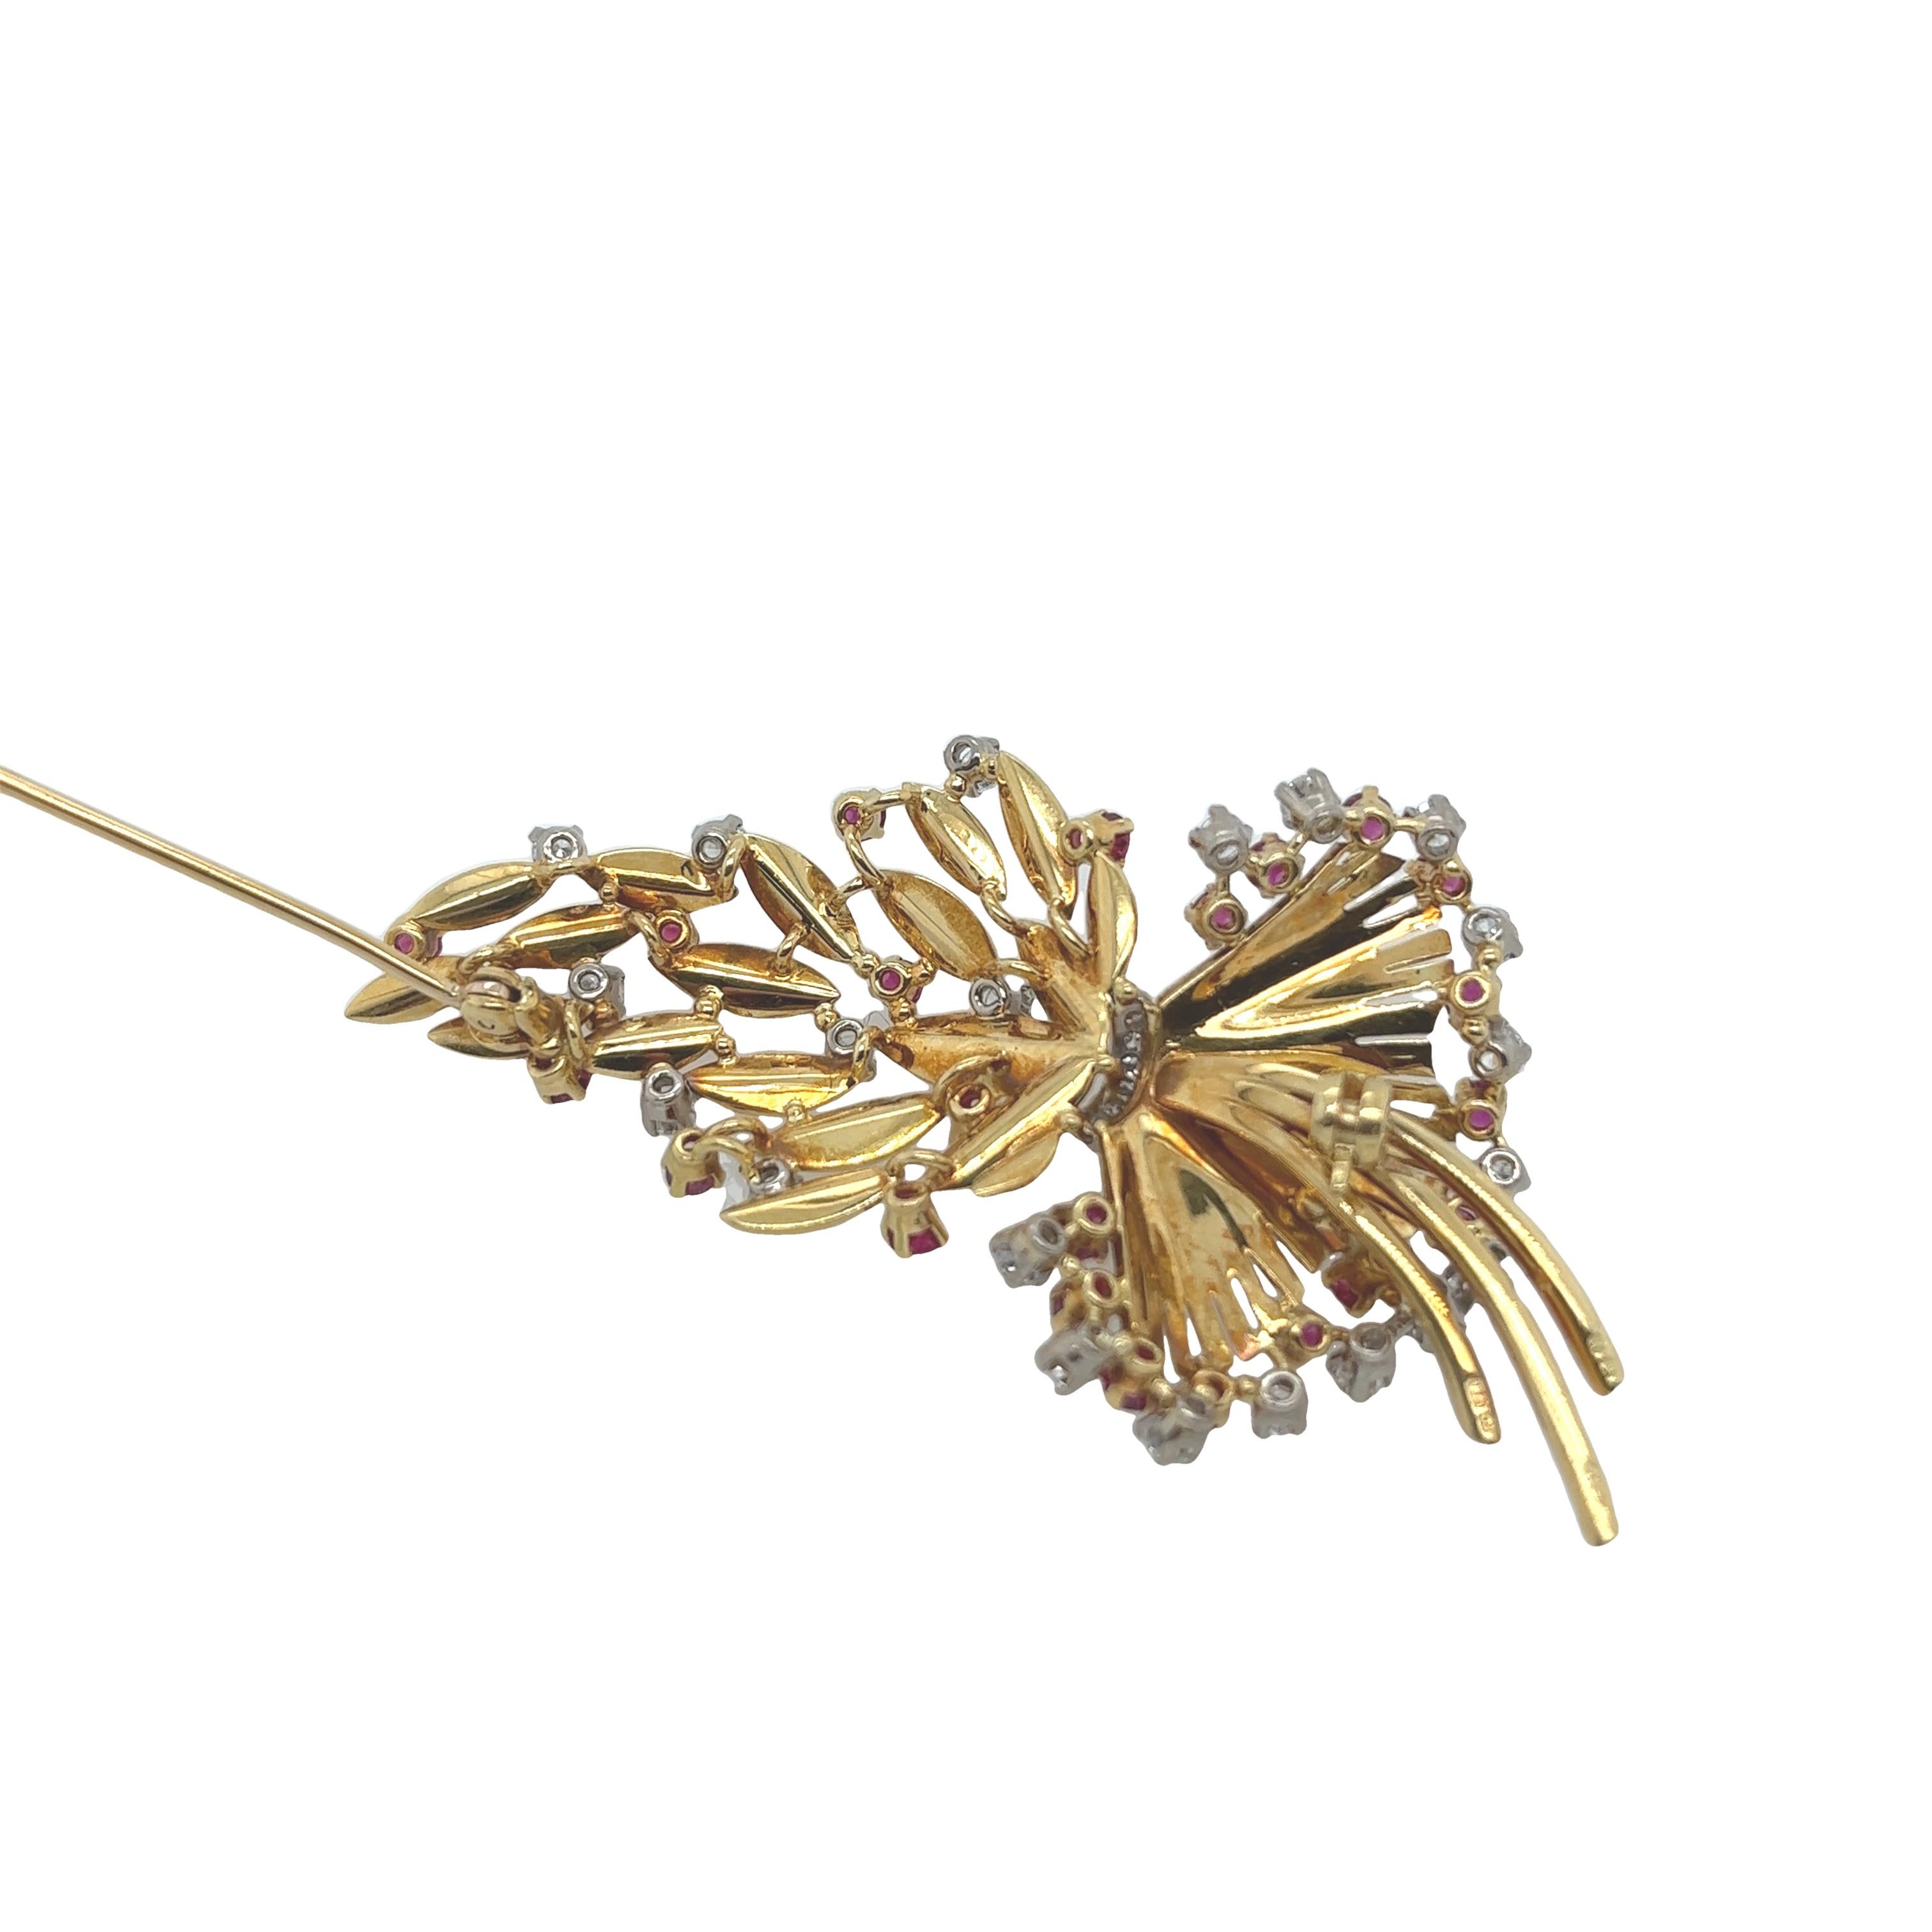 
This stunning vintage brooch is set with 28 round brilliant cut diamonds and 23 round rubies, set in 18ct yellow gold setting with pin and roll catch. 
This is a perfect gift for any occasion.

Total Gold Weight: 14.6g
Total Diamond Weight: